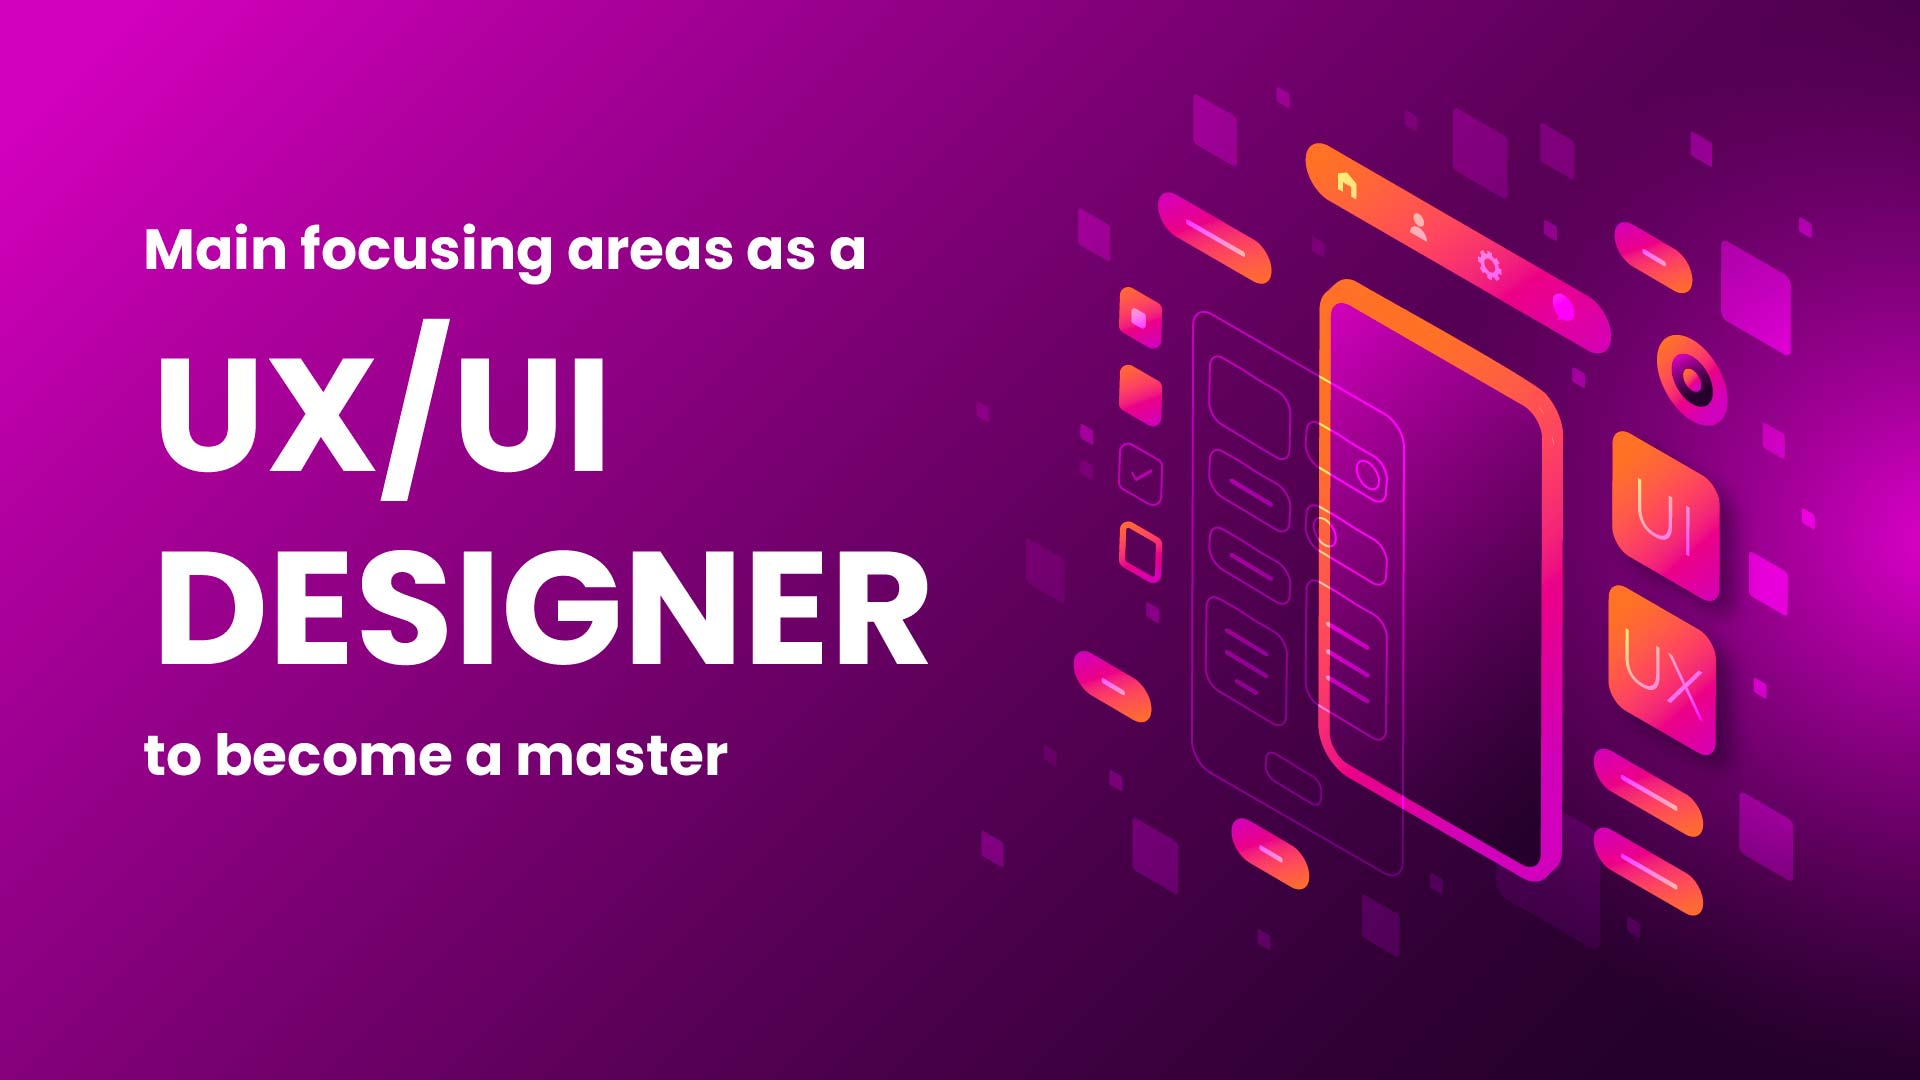 Main focusing areas as a UX/UI designer to become a master.